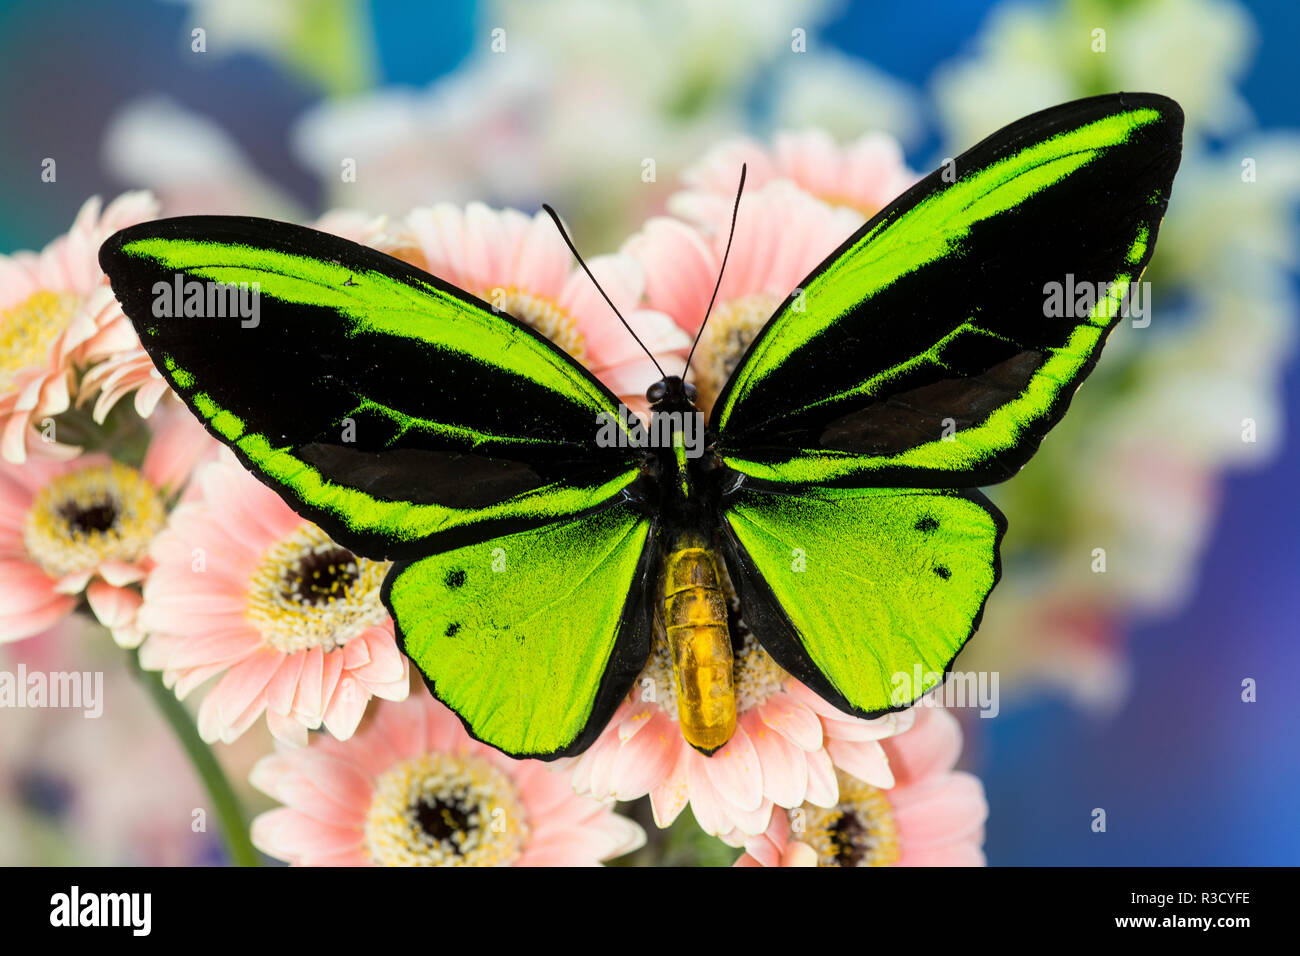 Male tropical butterfly Ornithoptera a Birdwing butterfly on Pink Gerber Daisy Stock Photo